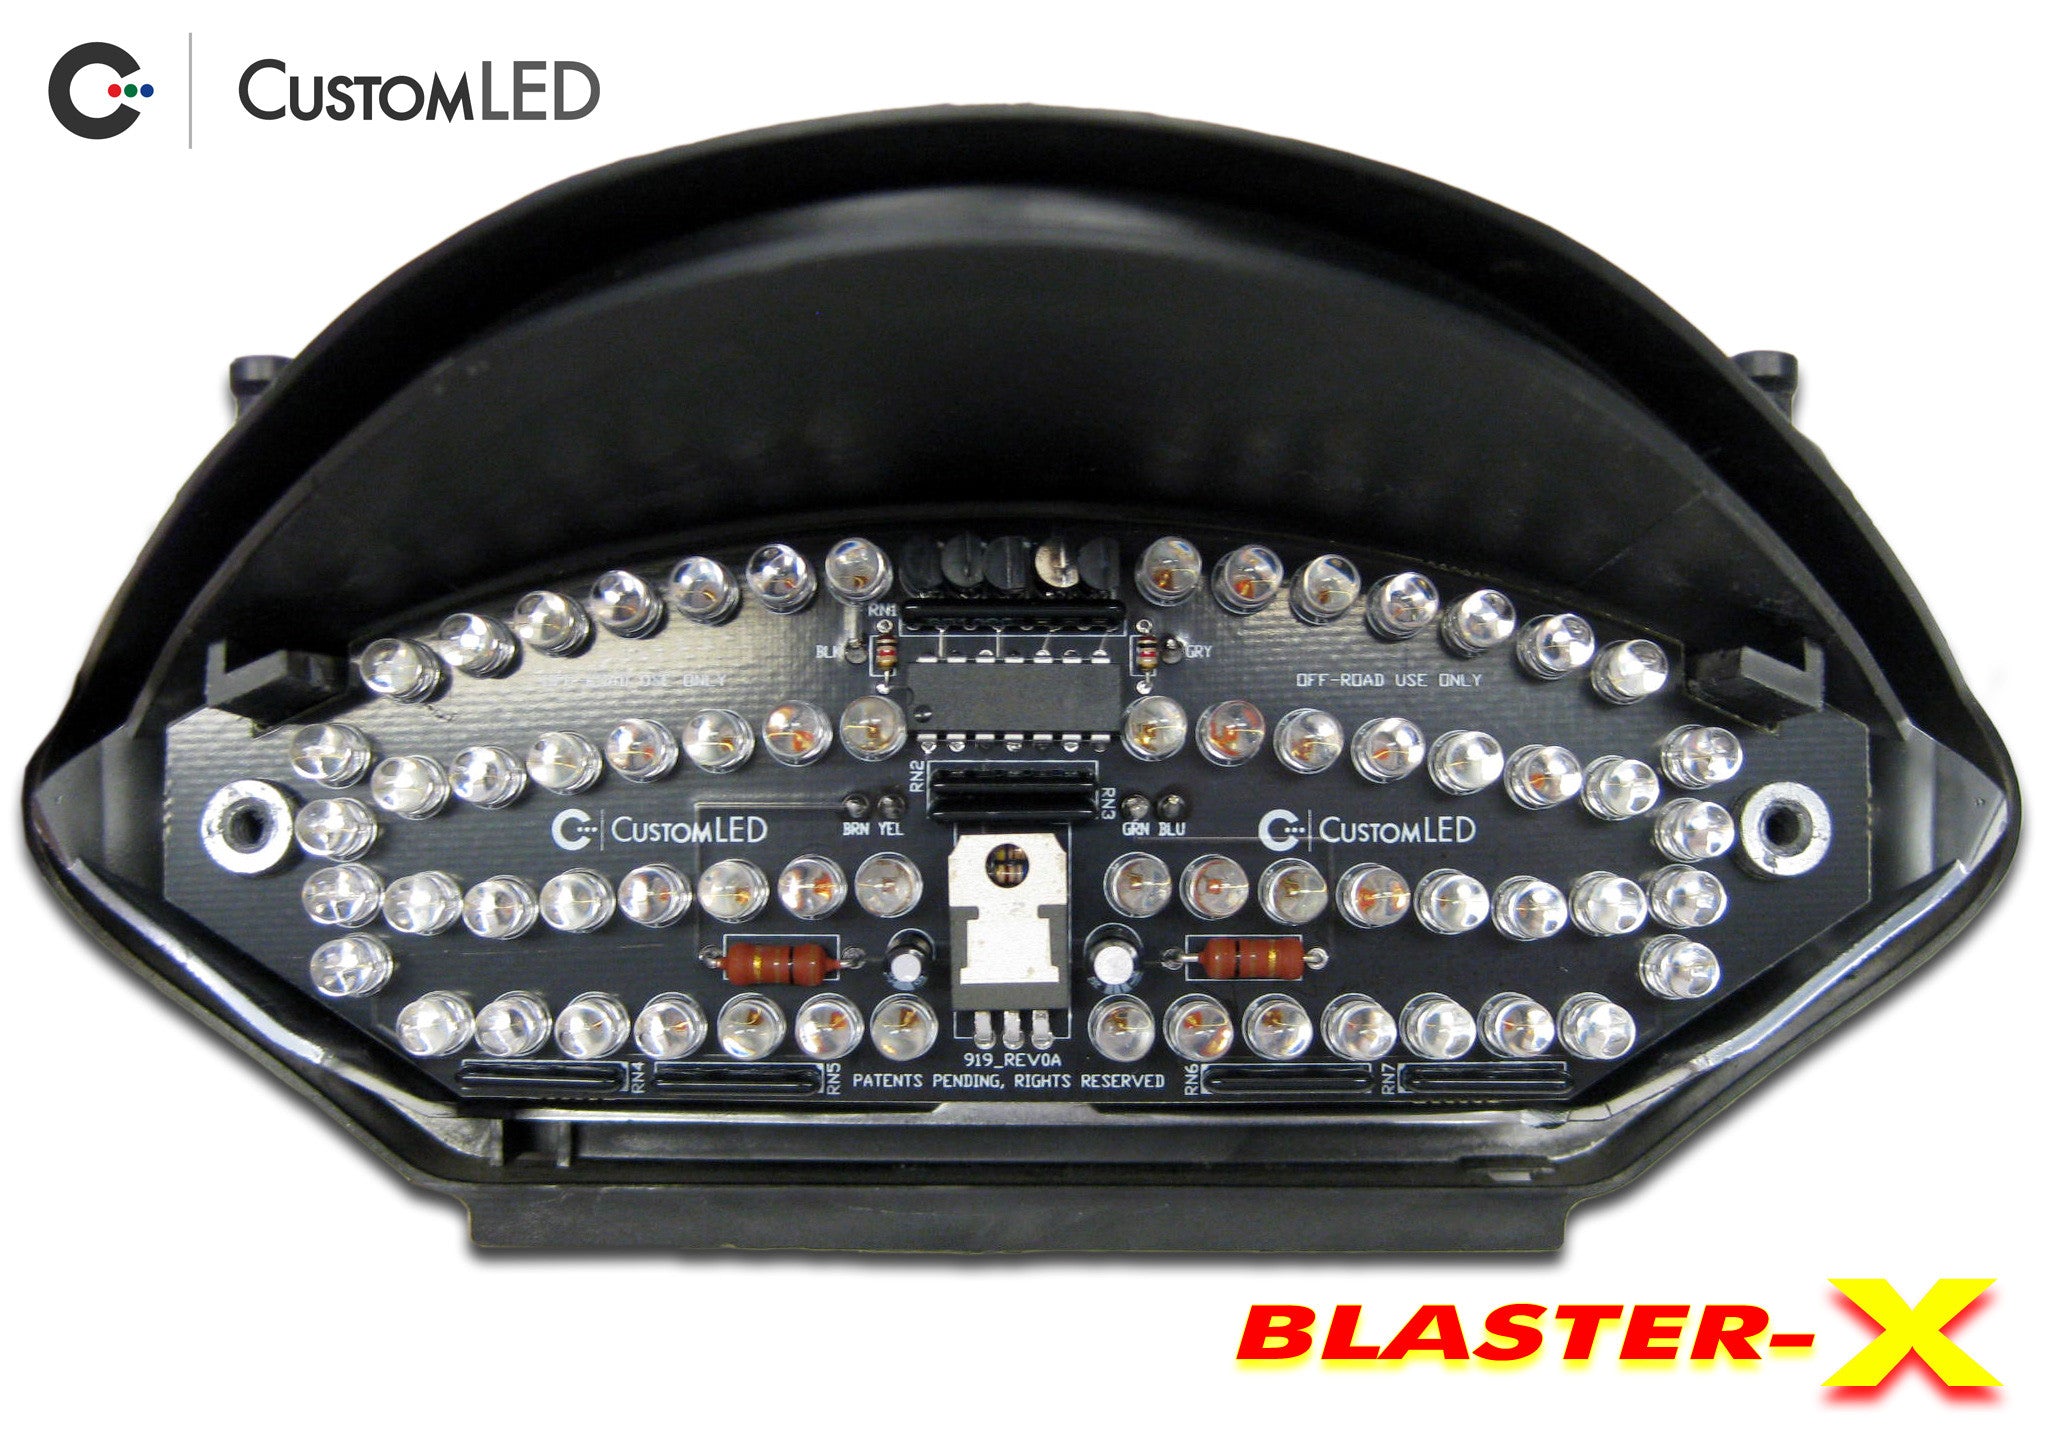 LED Motorcycle Brake Lights With Turn Signals & LED Taillights - LM57364-1